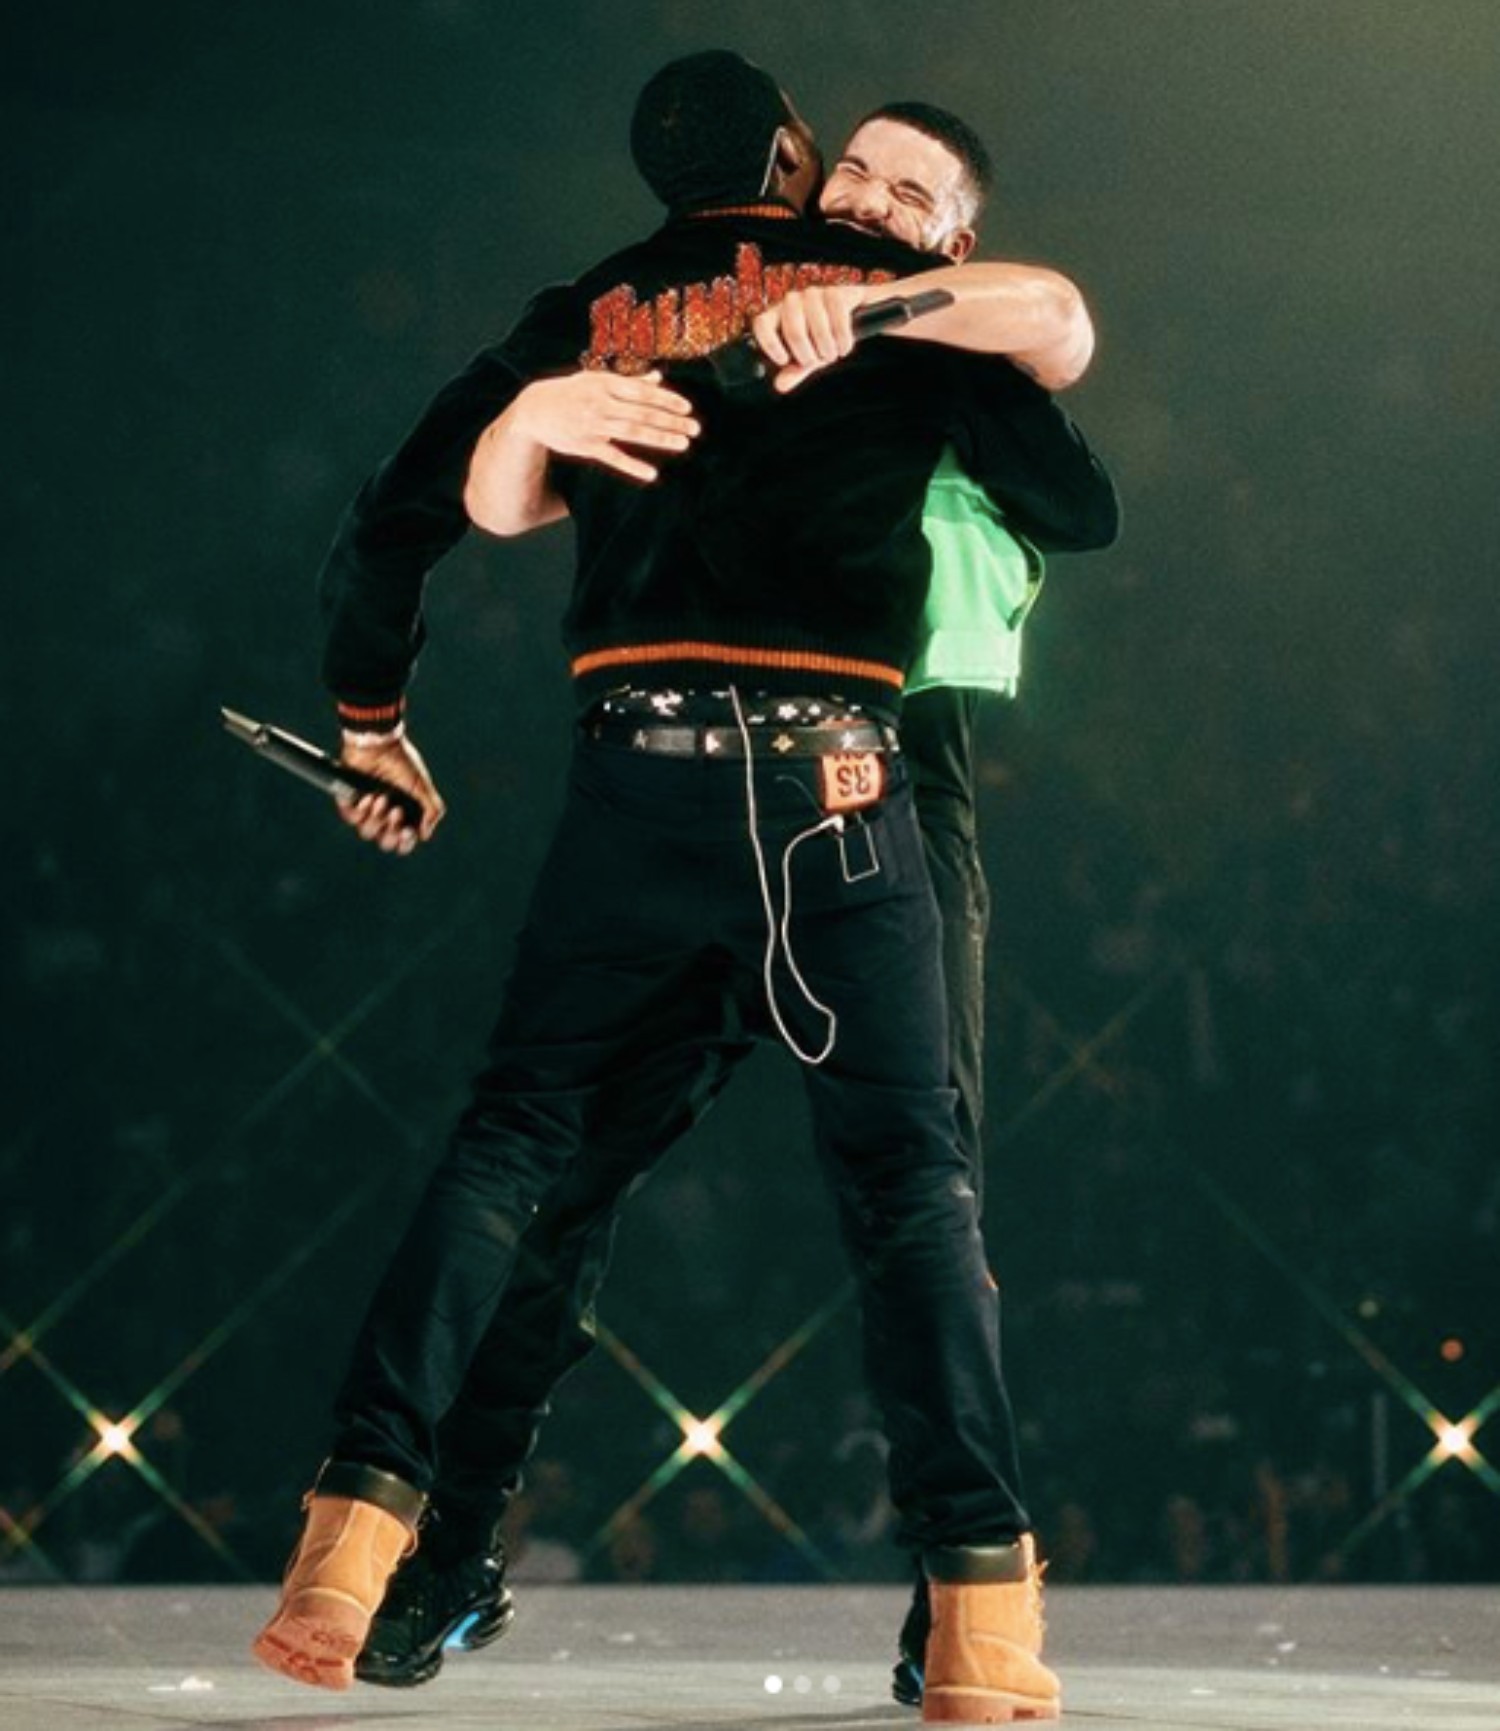 SPOTTED: Drake & Meek Mill Appear to End Feud